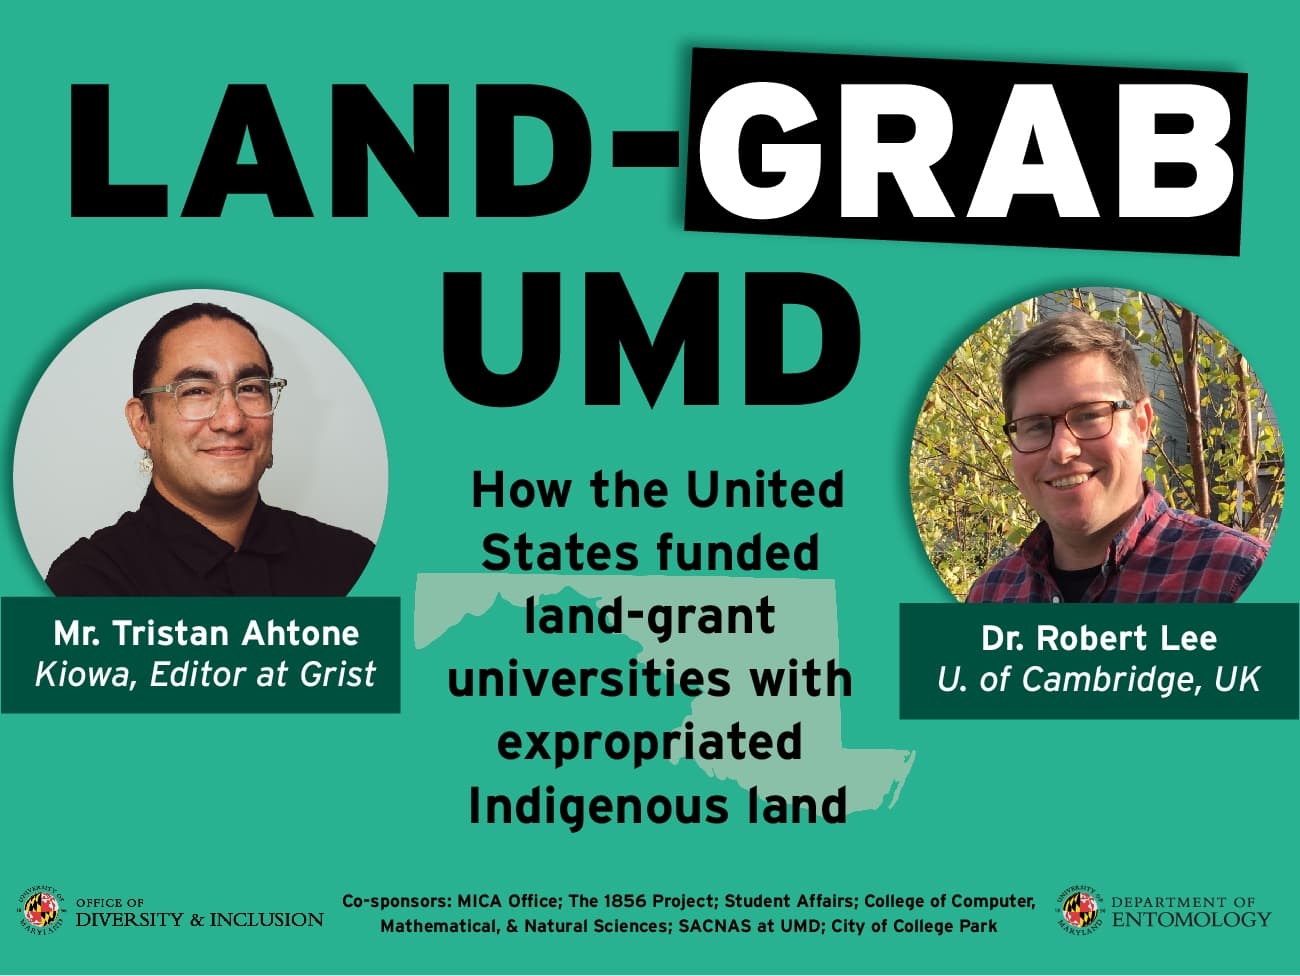 Event flyer with portraits of the two speakers and a bold headline reading "Land-Grab U-M-D" Text reads: "How the United States funded land-grant universities with expropriated Indigenous land"